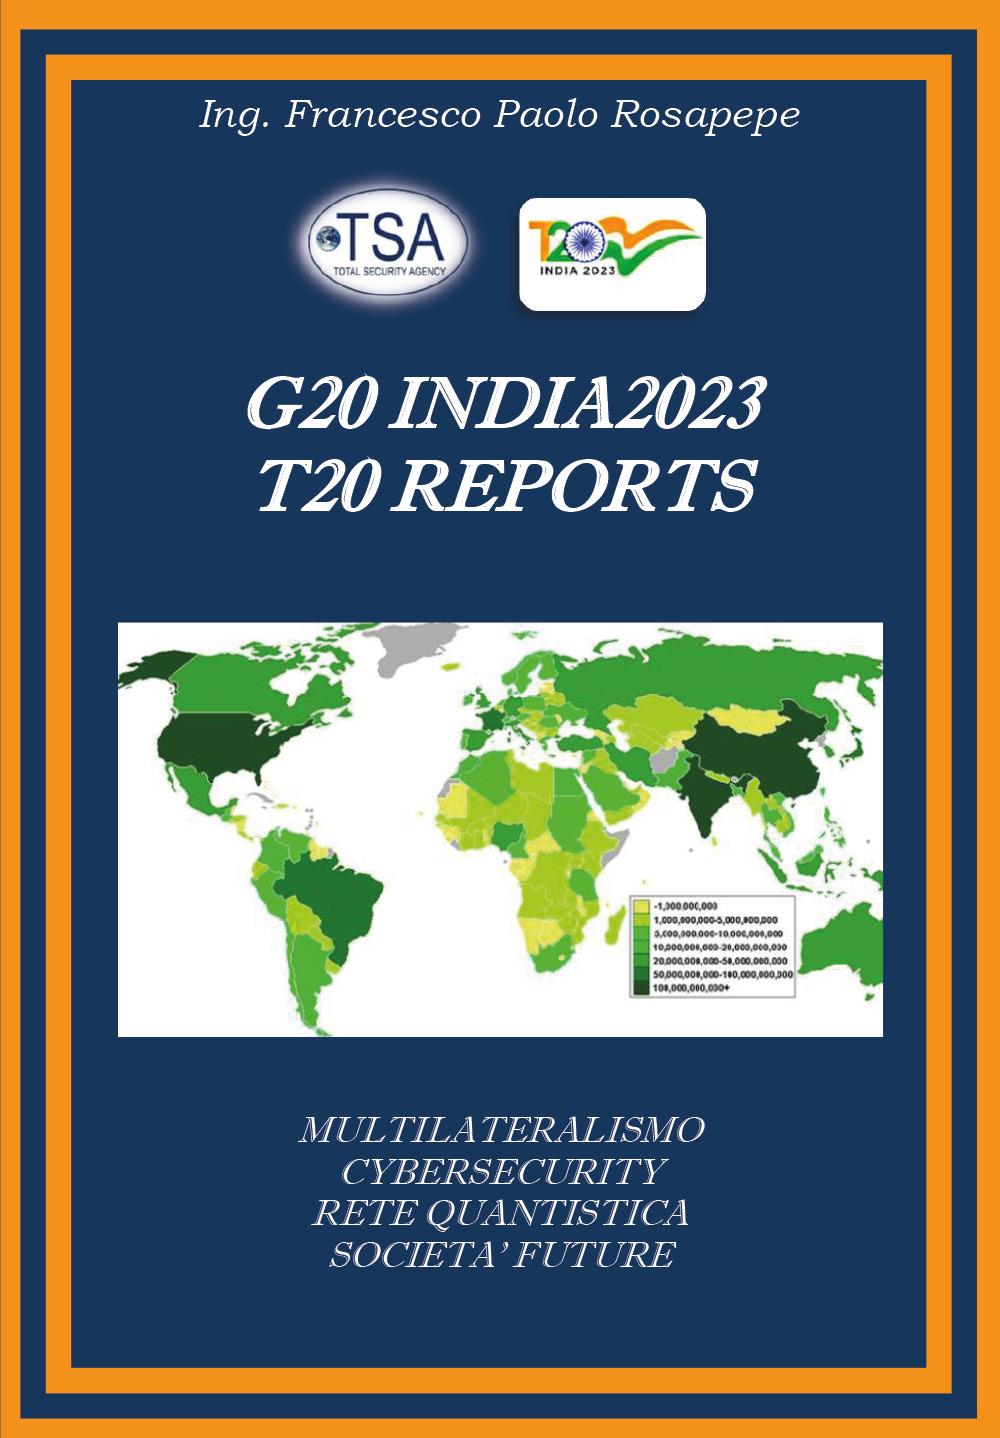 G20 India 2023 T20 Reports